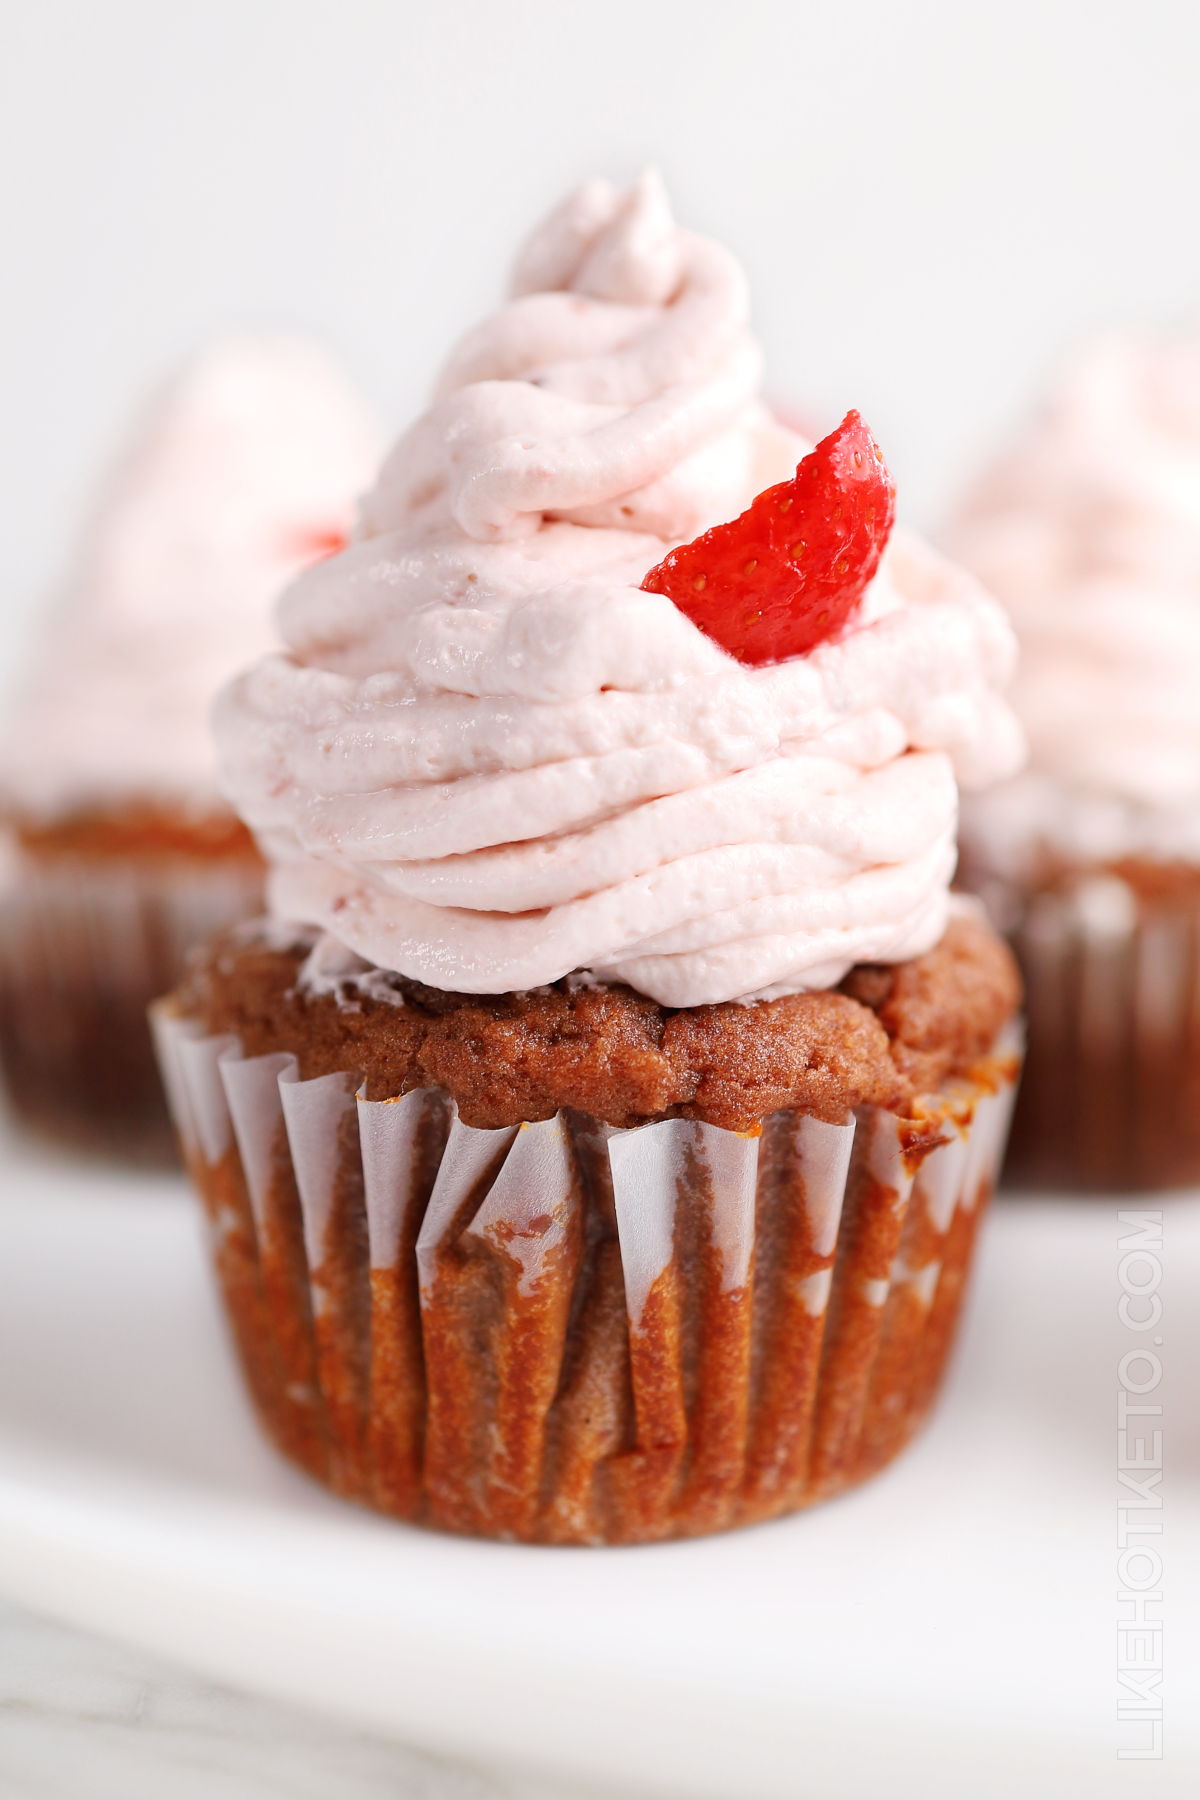 Keto strawberry cupcake with high pink strawberry frosting.